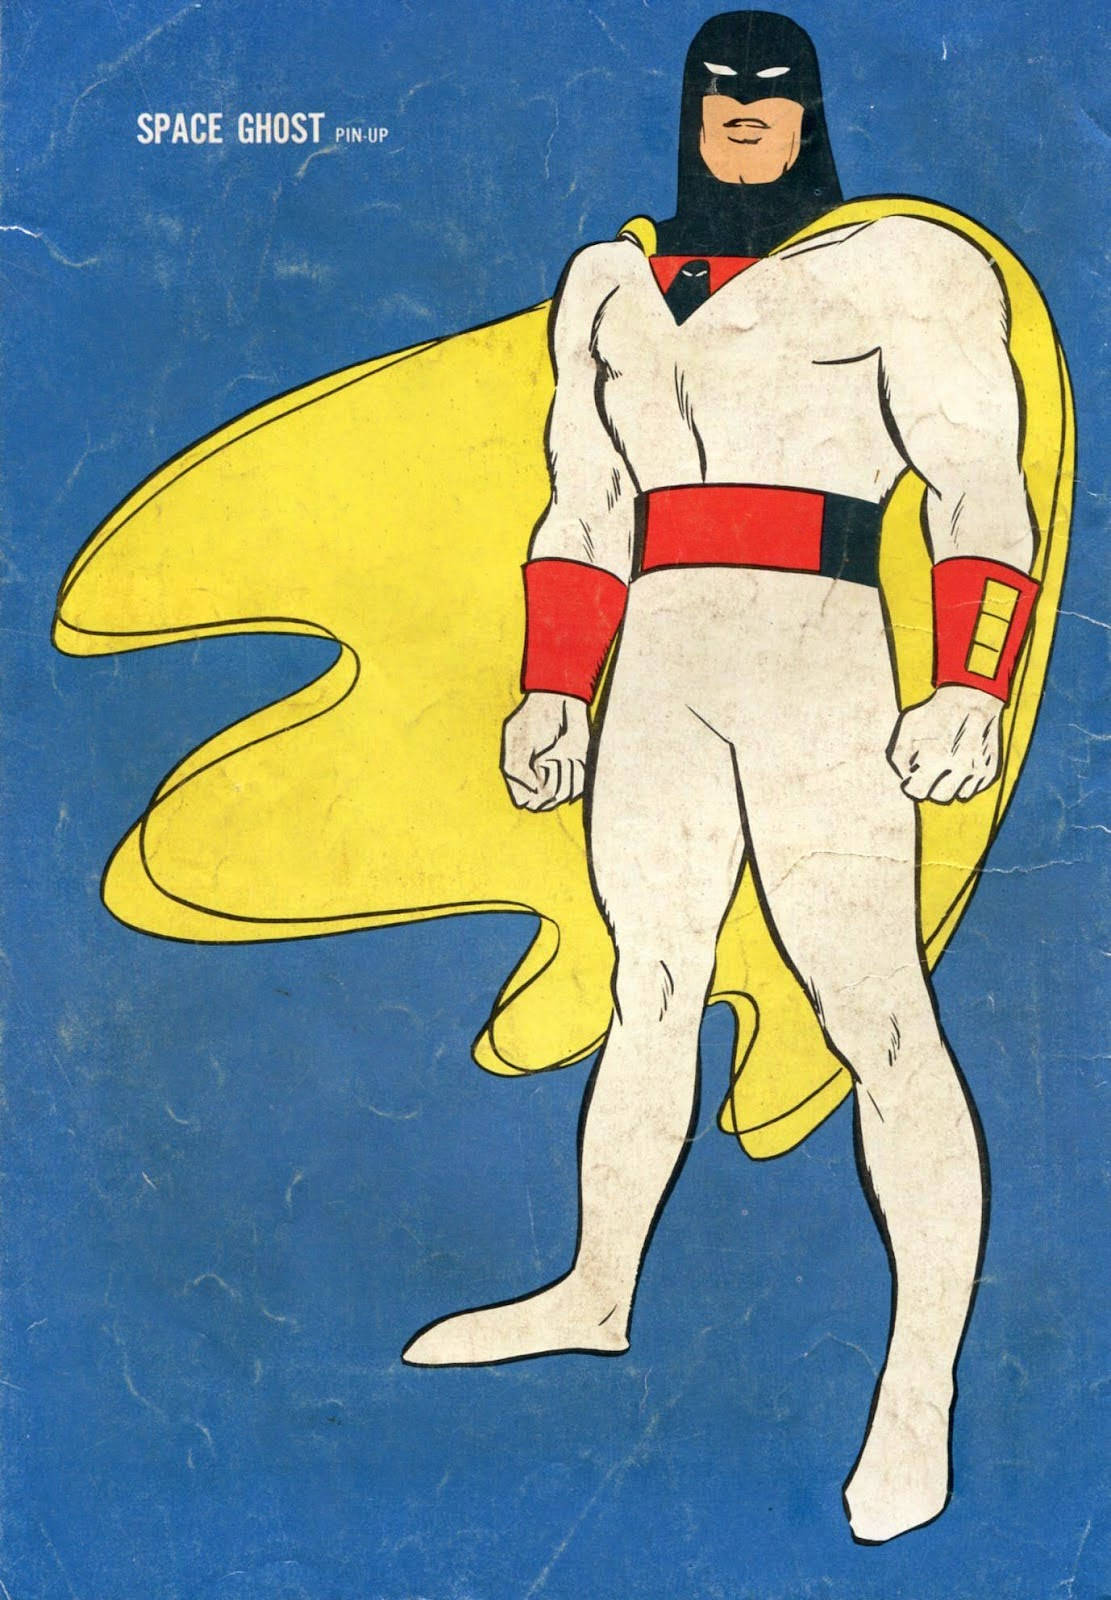 Space Ghost Pin-up Plakat Wallpaper